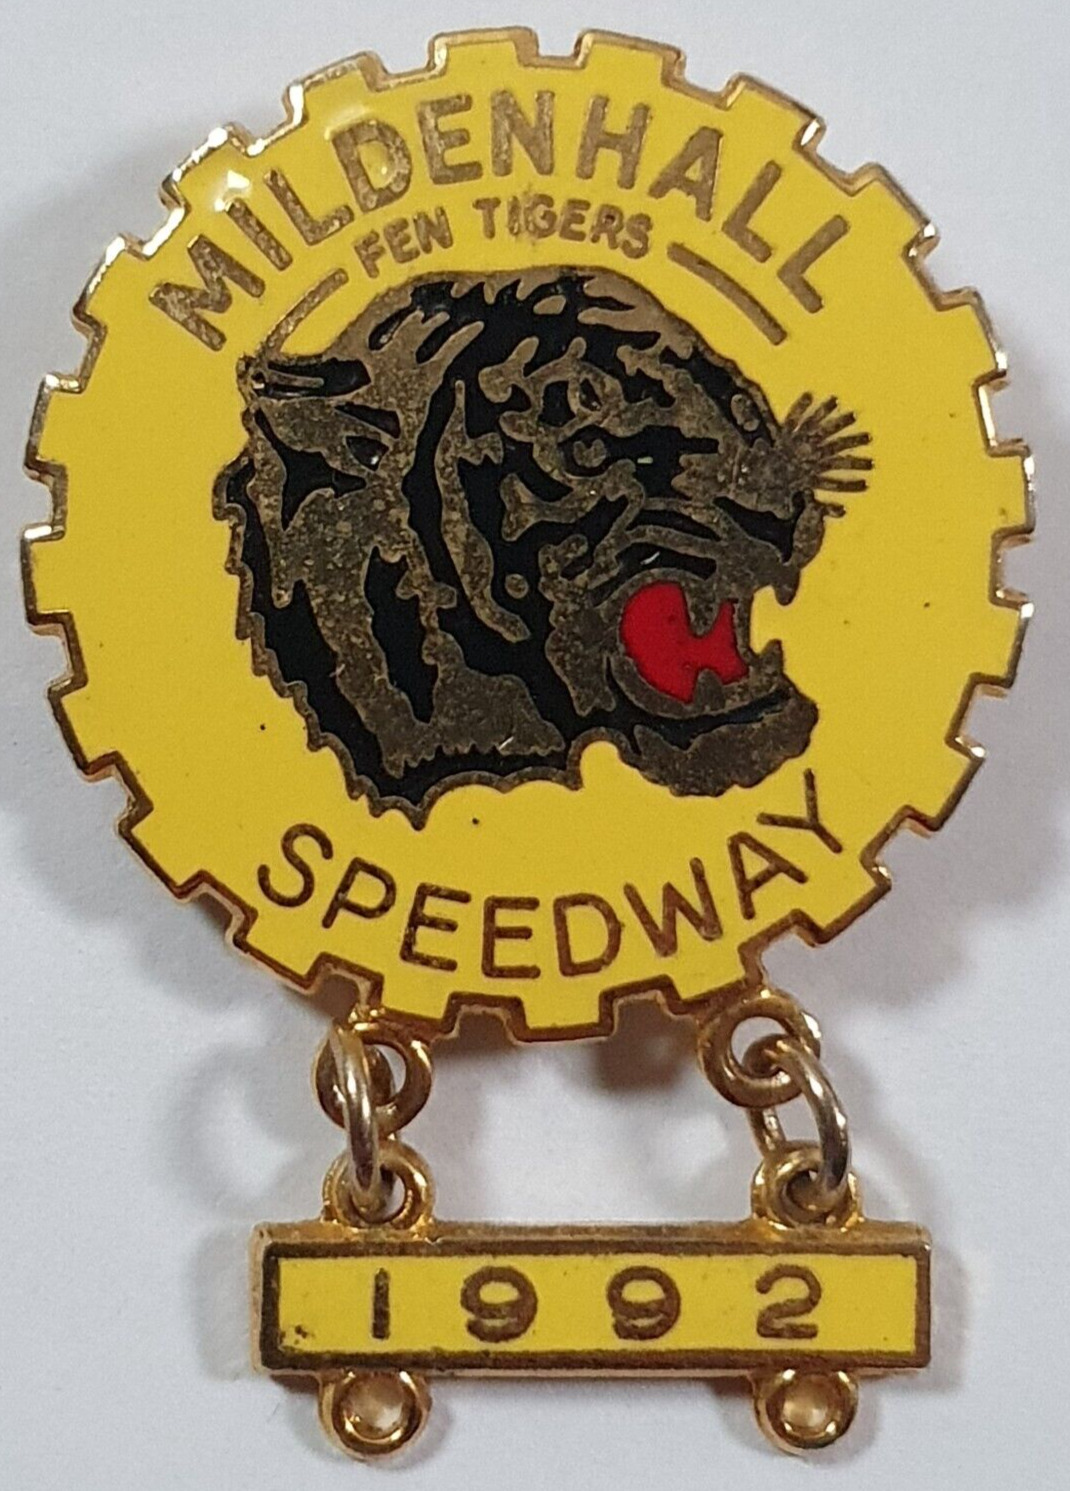 MildenHall Fen Tigers speedway Enamel Pin Badge With Date Bar 1992. 45x32mm.